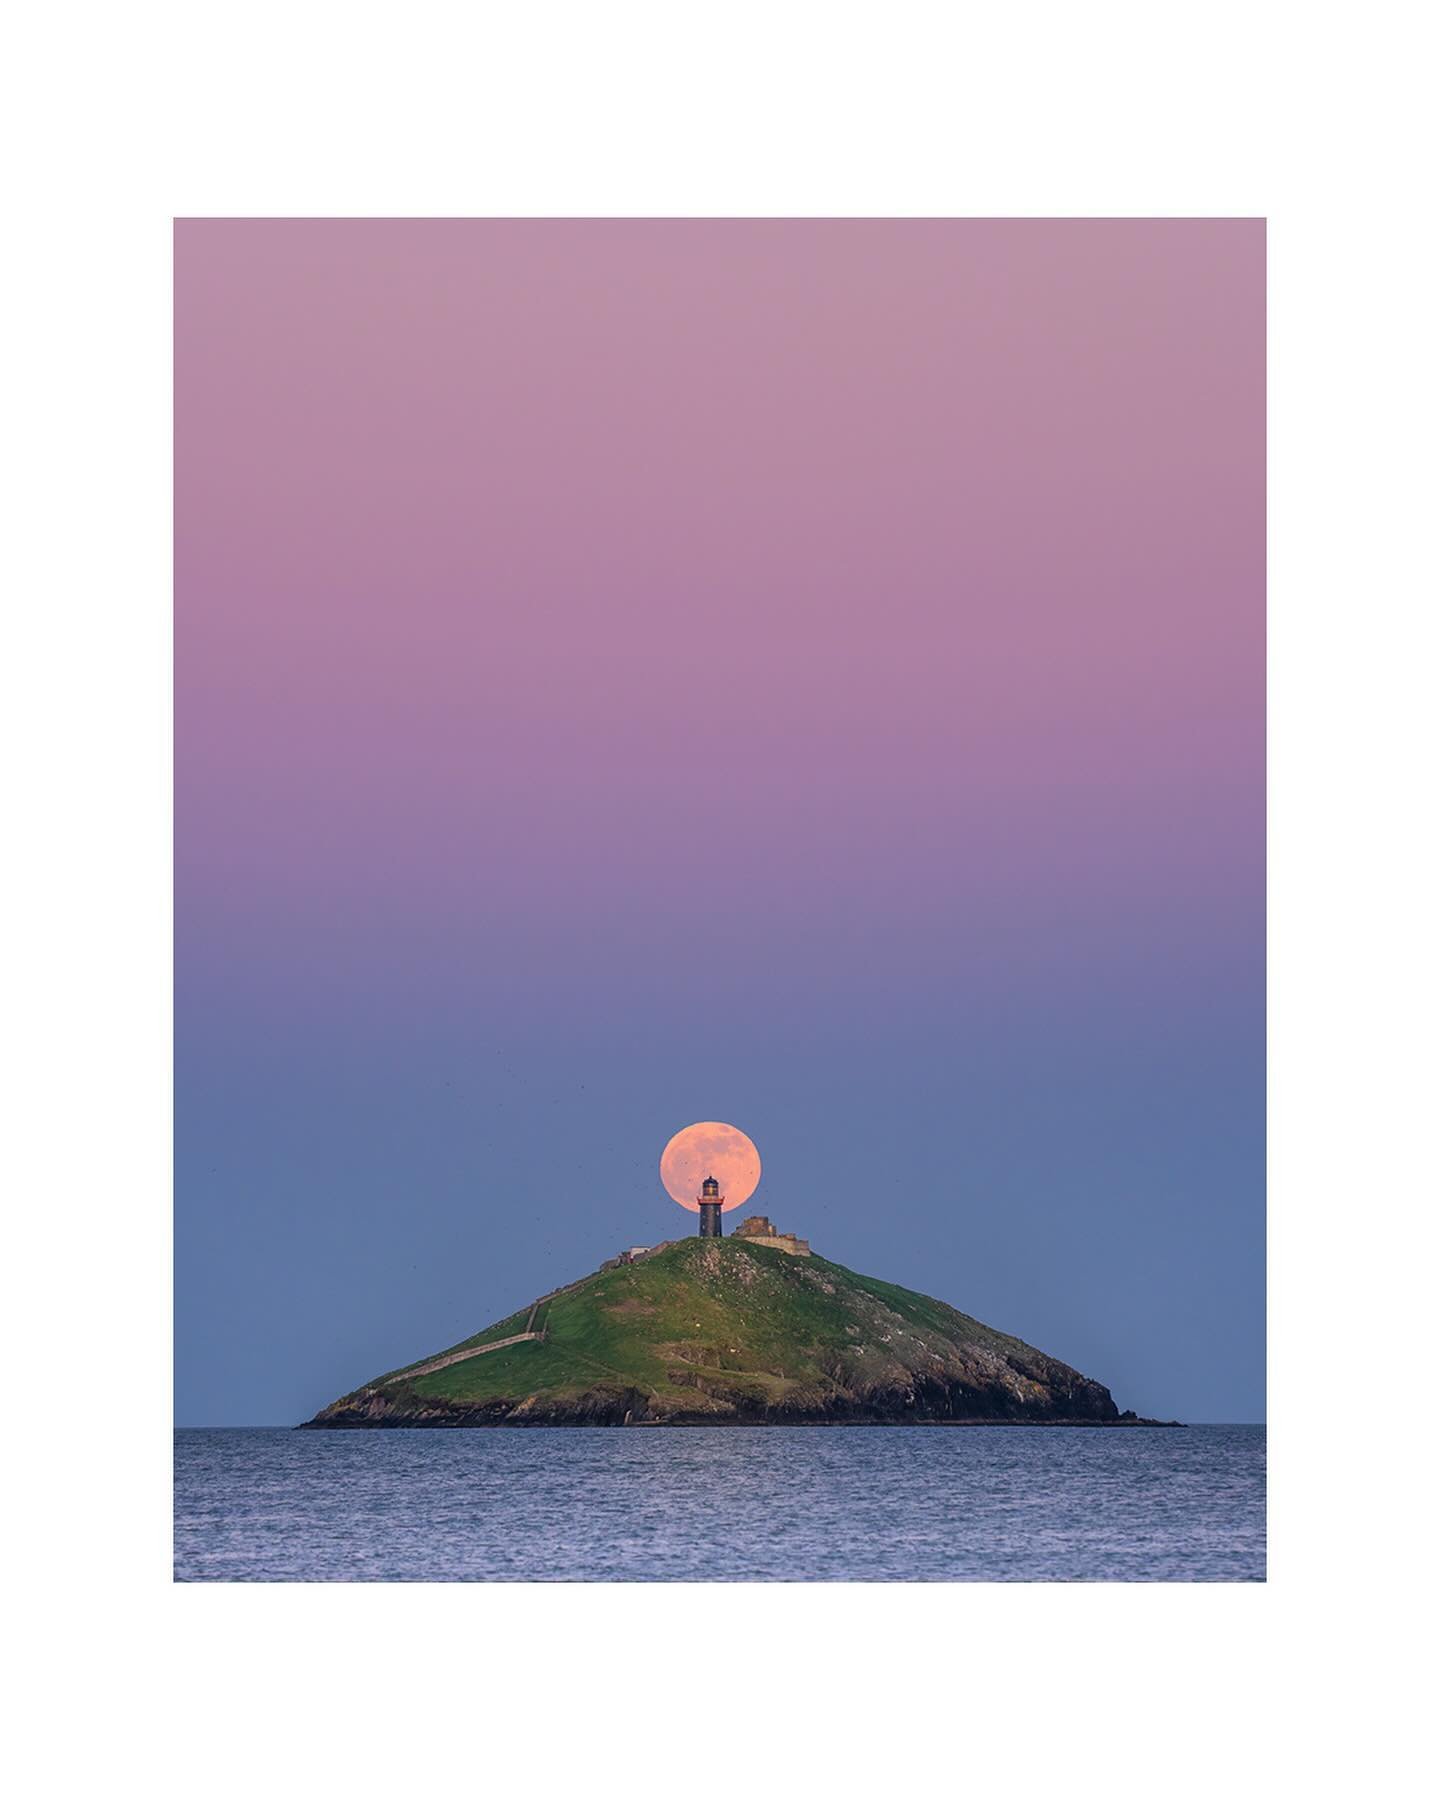 Tuesday night&rsquo;s Pink Moon photographed rising behind Ballycotton Lighthouse.

I can&rsquo;t thank Fred @rawdublin enough for inviting me along! It was one hell of an experience.

🚀 Greeting Cards, Prints, Totes &amp; Postcards: www.peterotoole